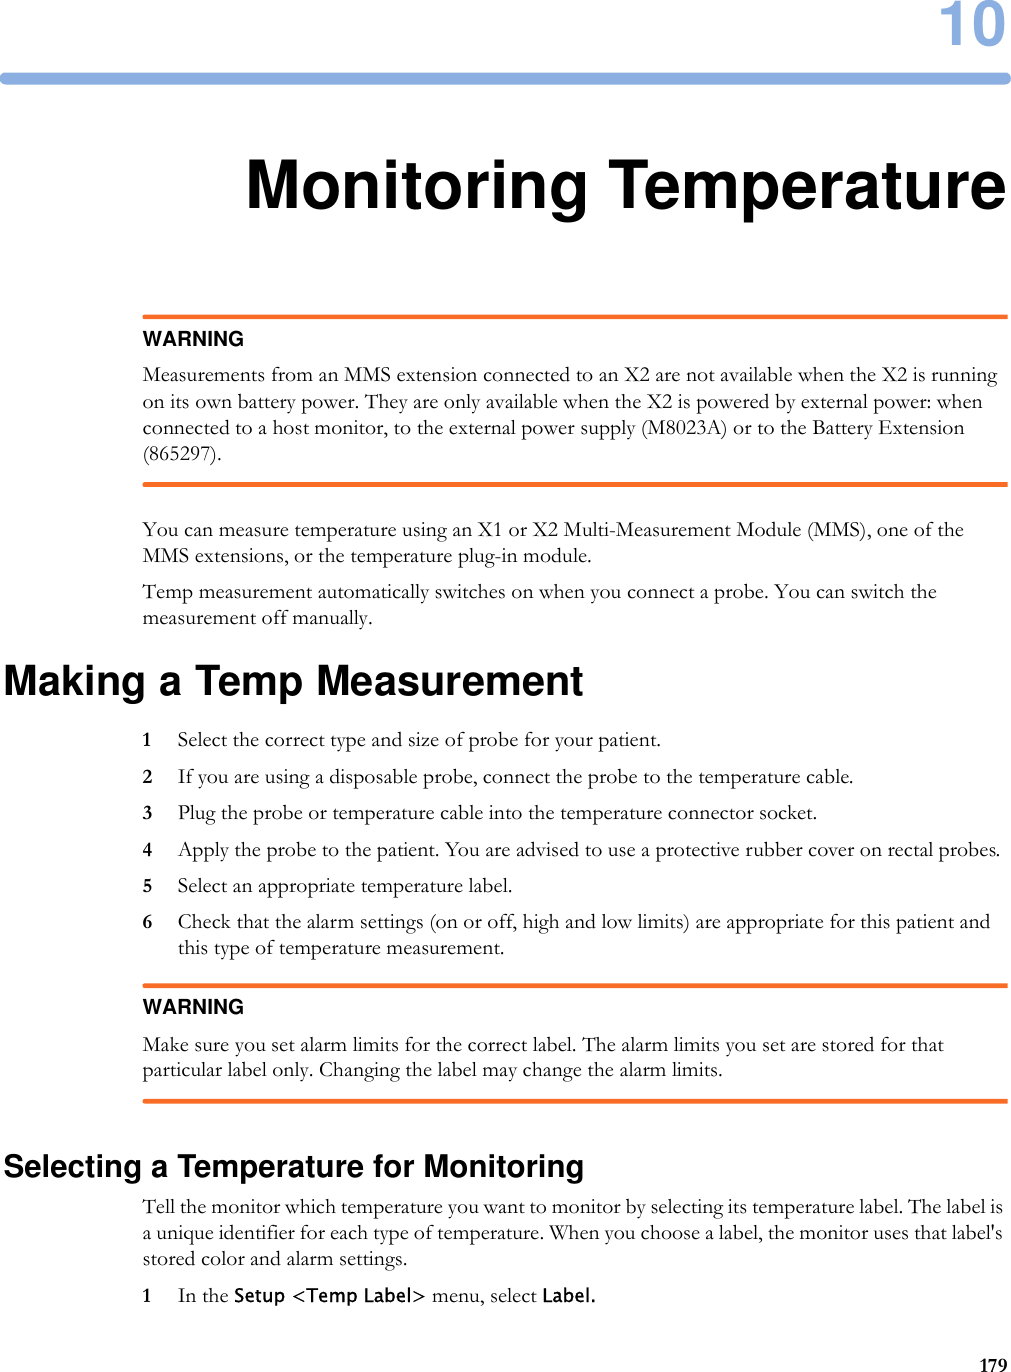 1017910Monitoring TemperatureWARNINGMeasurements from an MMS extension connected to an X2 are not available when the X2 is running on its own battery power. They are only available when the X2 is powered by external power: when connected to a host monitor, to the external power supply (M8023A) or to the Battery Extension (865297).You can measure temperature using an X1 or X2 Multi-Measurement Module (MMS), one of the MMS extensions, or the temperature plug-in module.Temp measurement automatically switches on when you connect a probe. You can switch the measurement off manually.Making a Temp Measurement1Select the correct type and size of probe for your patient.2If you are using a disposable probe, connect the probe to the temperature cable.3Plug the probe or temperature cable into the temperature connector socket.4Apply the probe to the patient. You are advised to use a protective rubber cover on rectal probes.5Select an appropriate temperature label.6Check that the alarm settings (on or off, high and low limits) are appropriate for this patient and this type of temperature measurement.WARNINGMake sure you set alarm limits for the correct label. The alarm limits you set are stored for that particular label only. Changing the label may change the alarm limits.Selecting a Temperature for MonitoringTell the monitor which temperature you want to monitor by selecting its temperature label. The label is a unique identifier for each type of temperature. When you choose a label, the monitor uses that label&apos;s stored color and alarm settings.1In the Setup &lt;Temp Label&gt; menu, select Label.